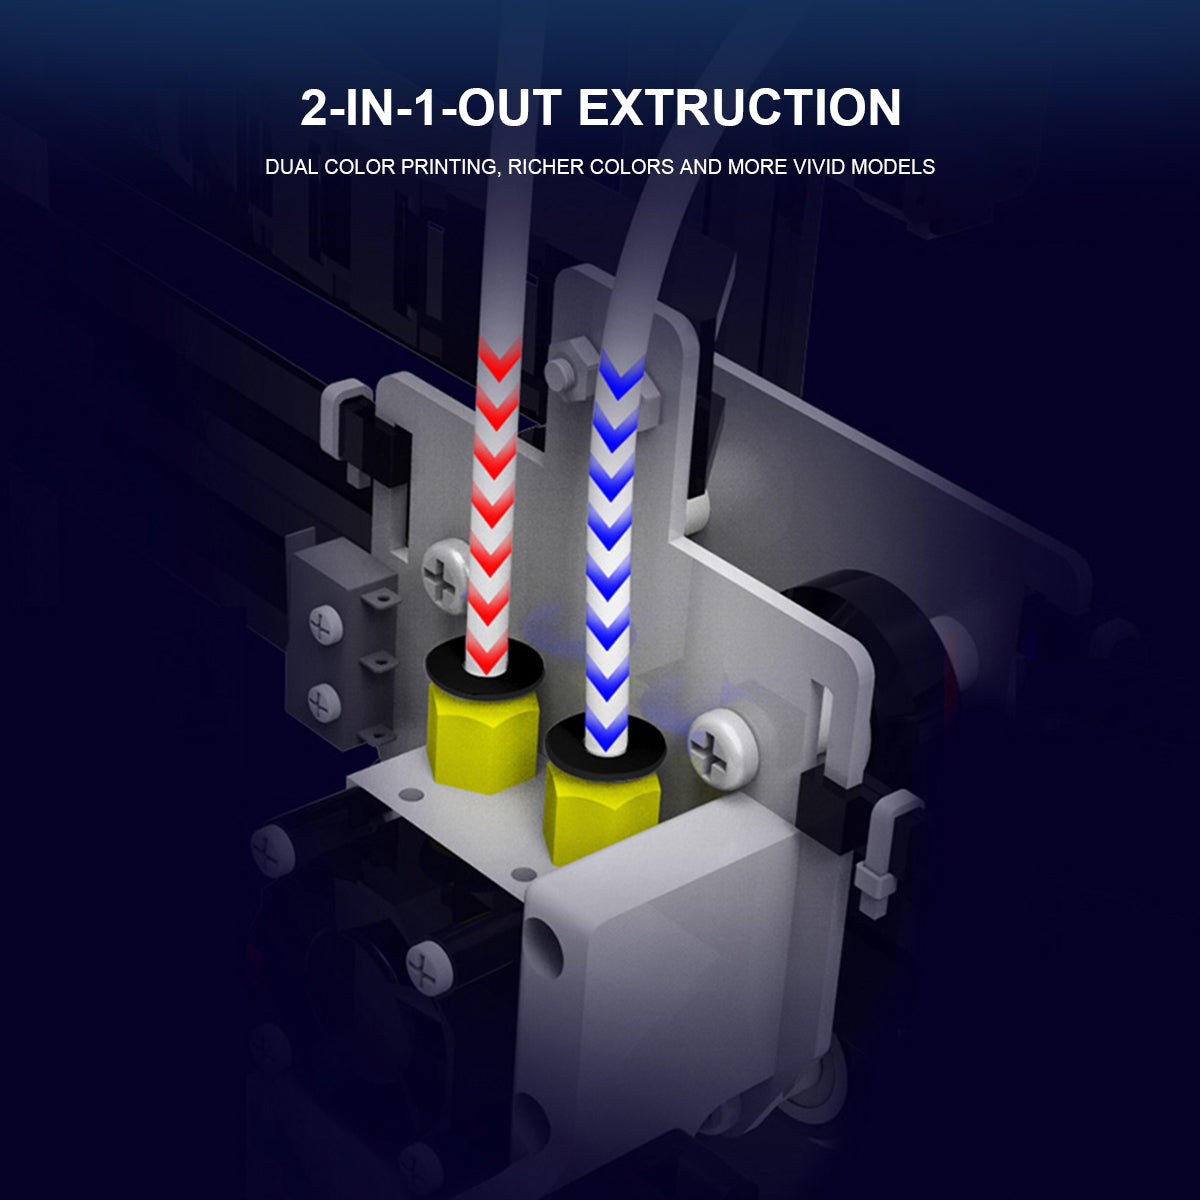 Simultaneous extrusion of two extruders filament · Issue #8620